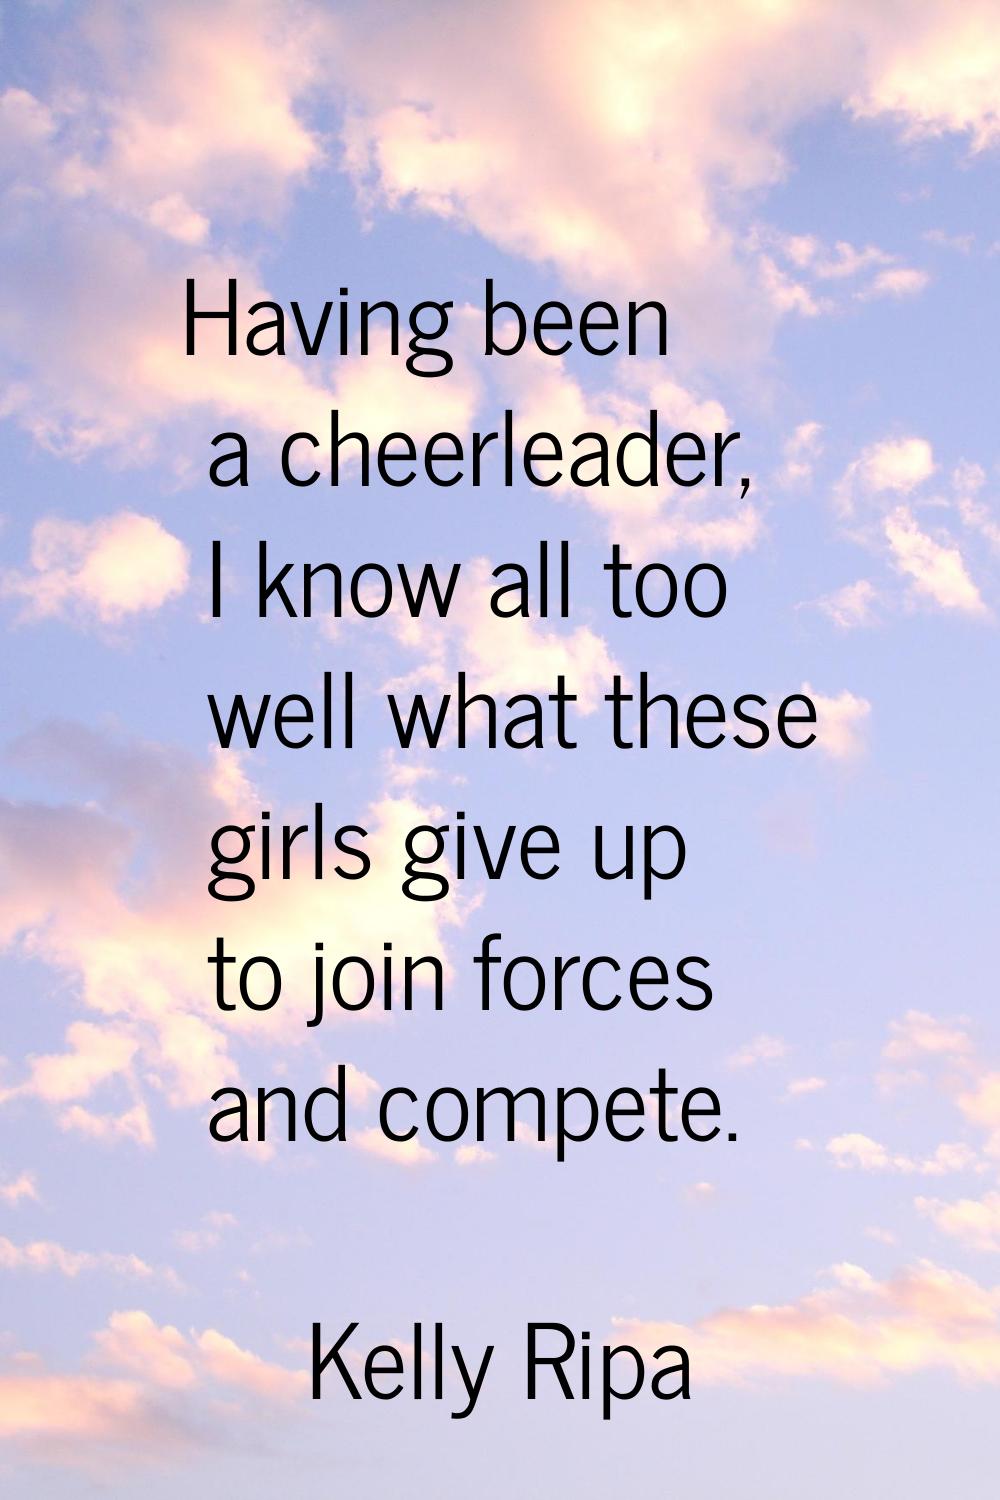 Having been a cheerleader, I know all too well what these girls give up to join forces and compete.